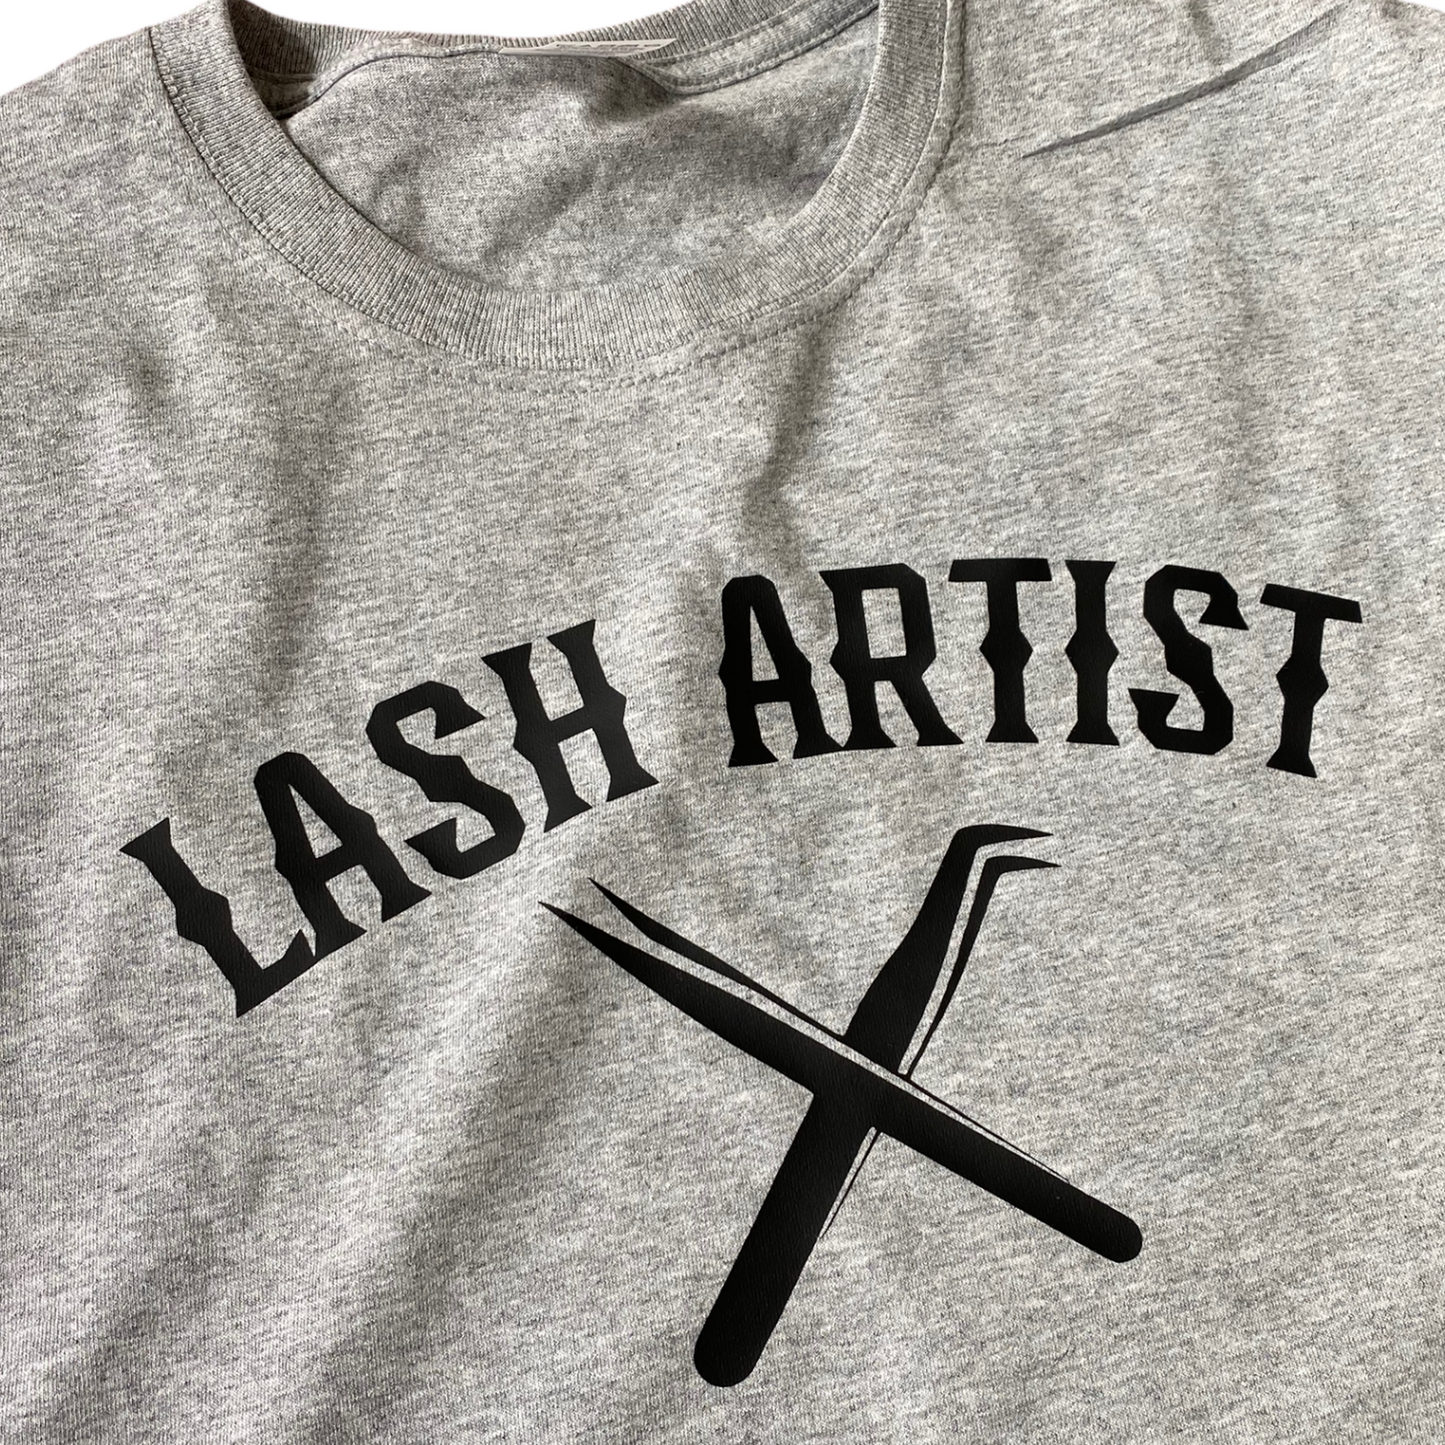 T-SHIRT - LASH ARTIST ( relaxed fit )